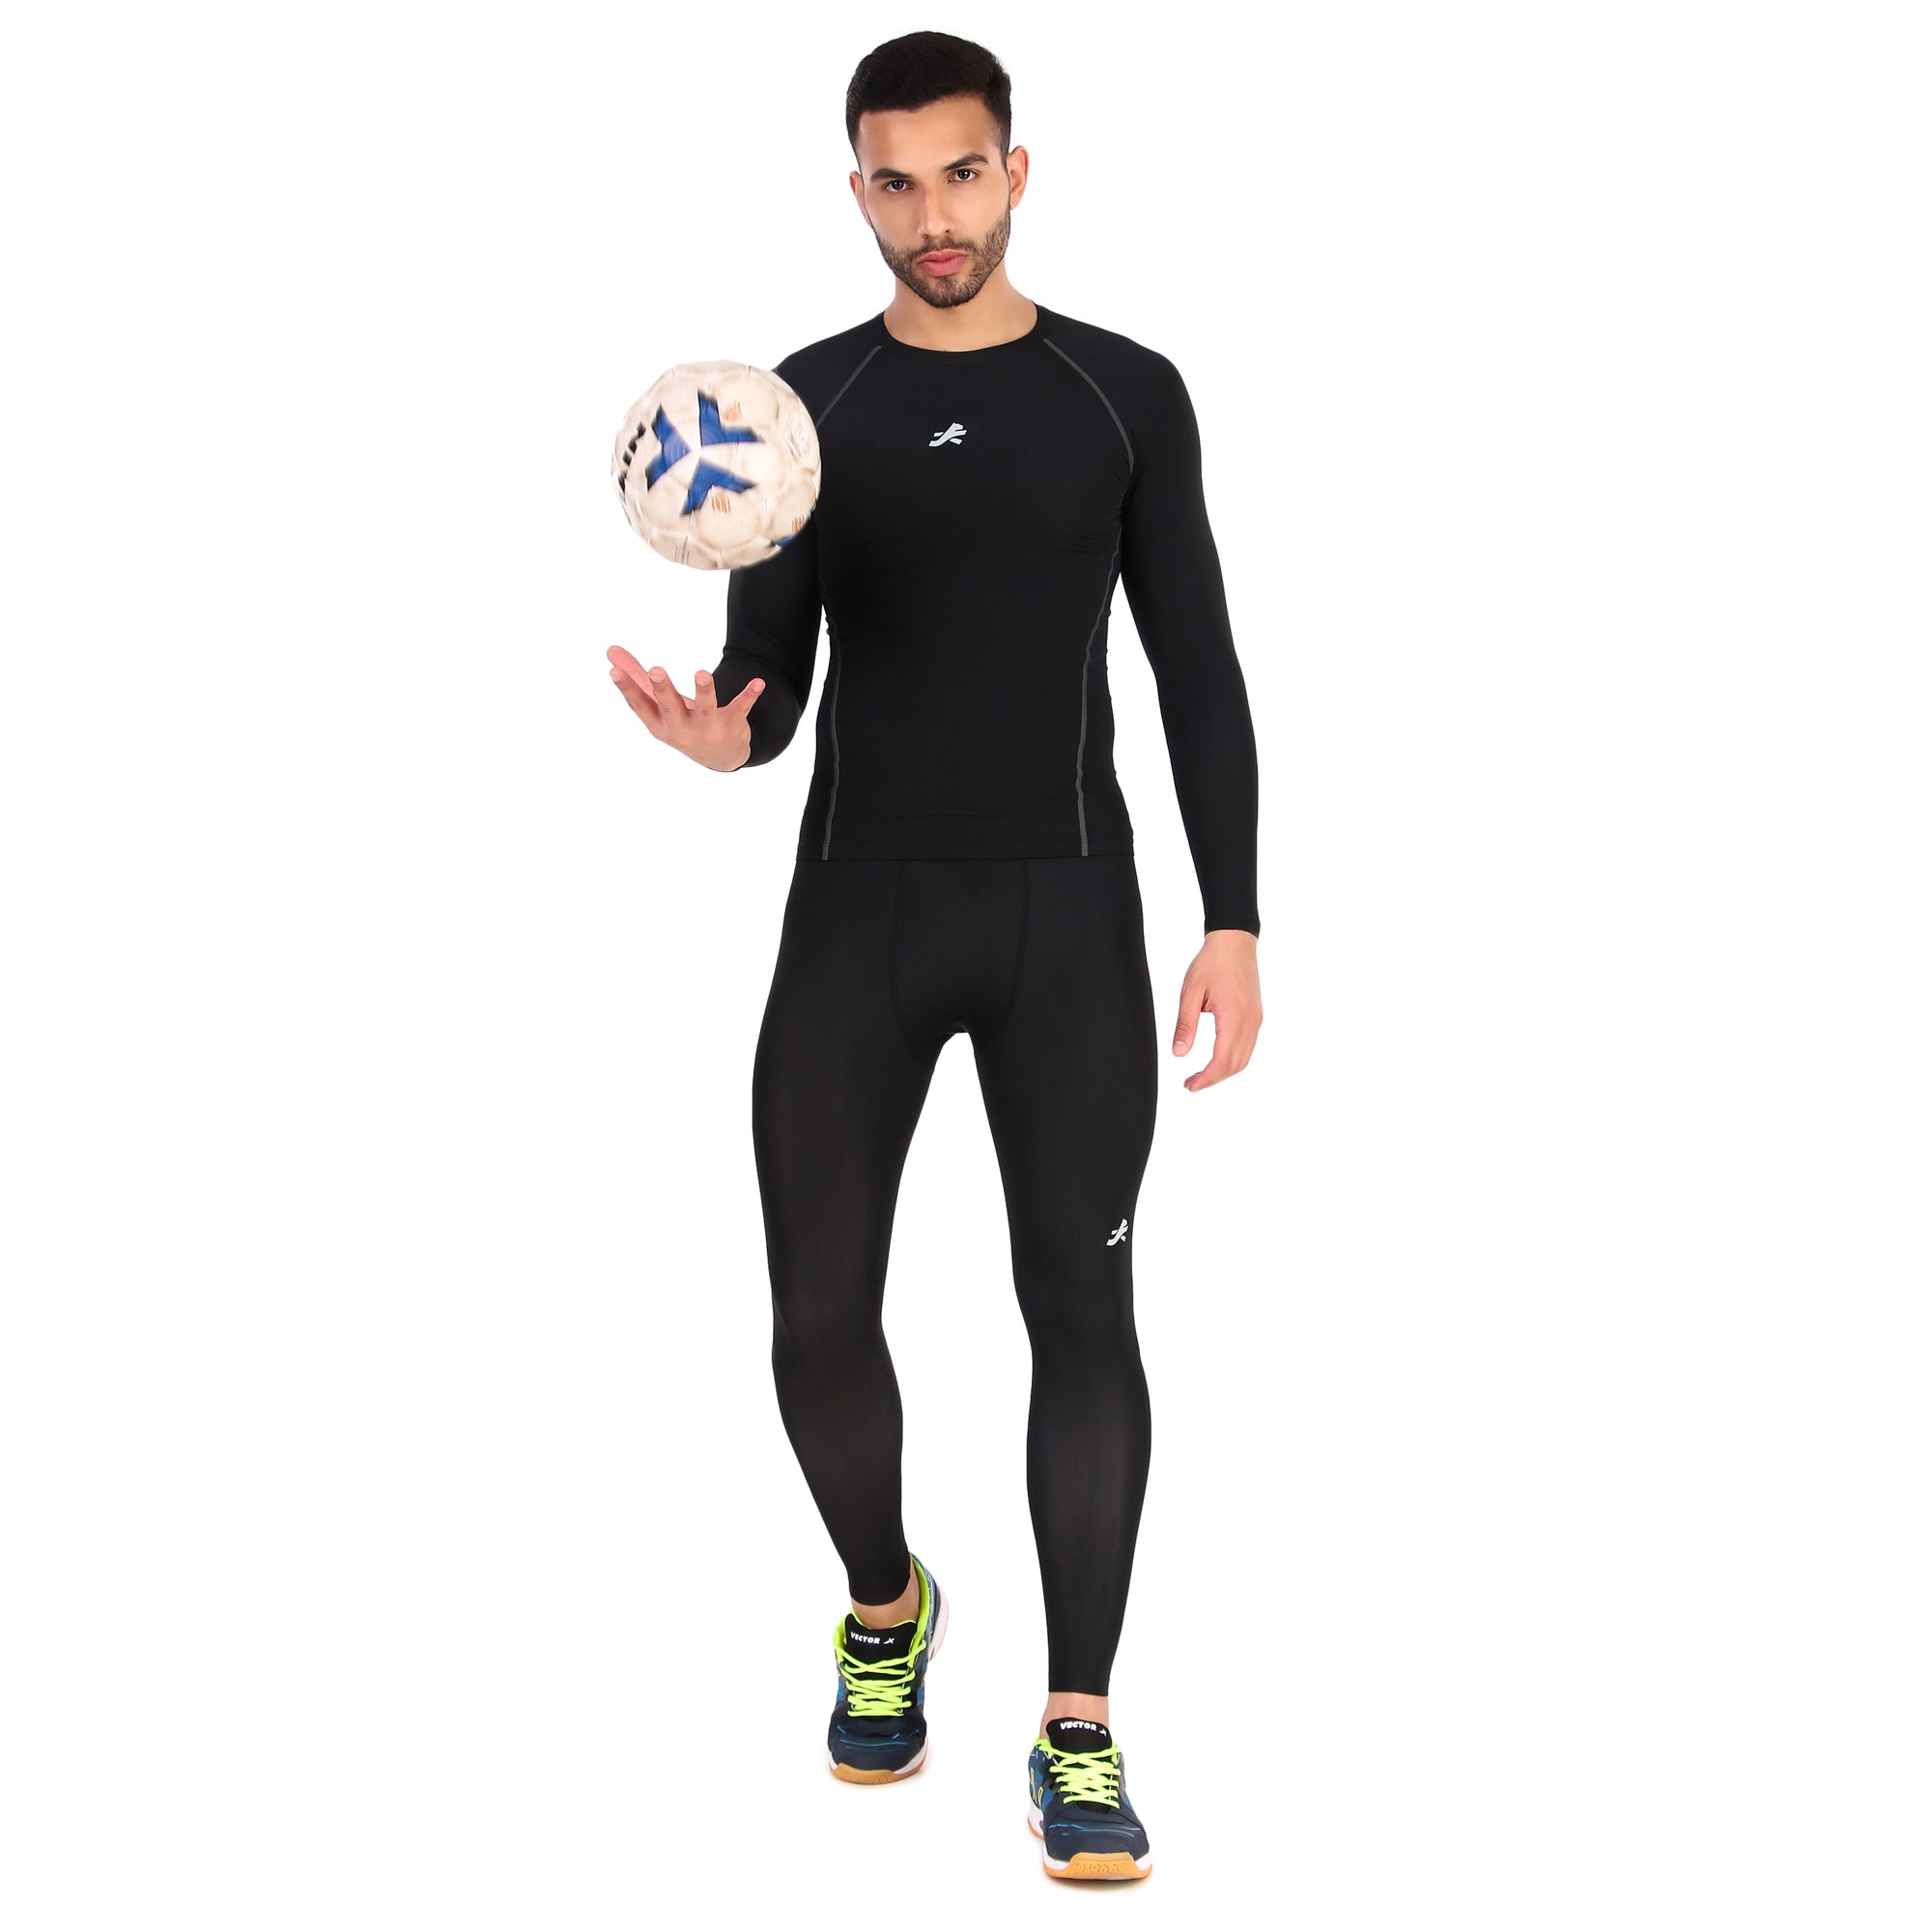 Polyester Full Sleeves Black Compression Tights Men T shirt at Rs 285 in  New Delhi